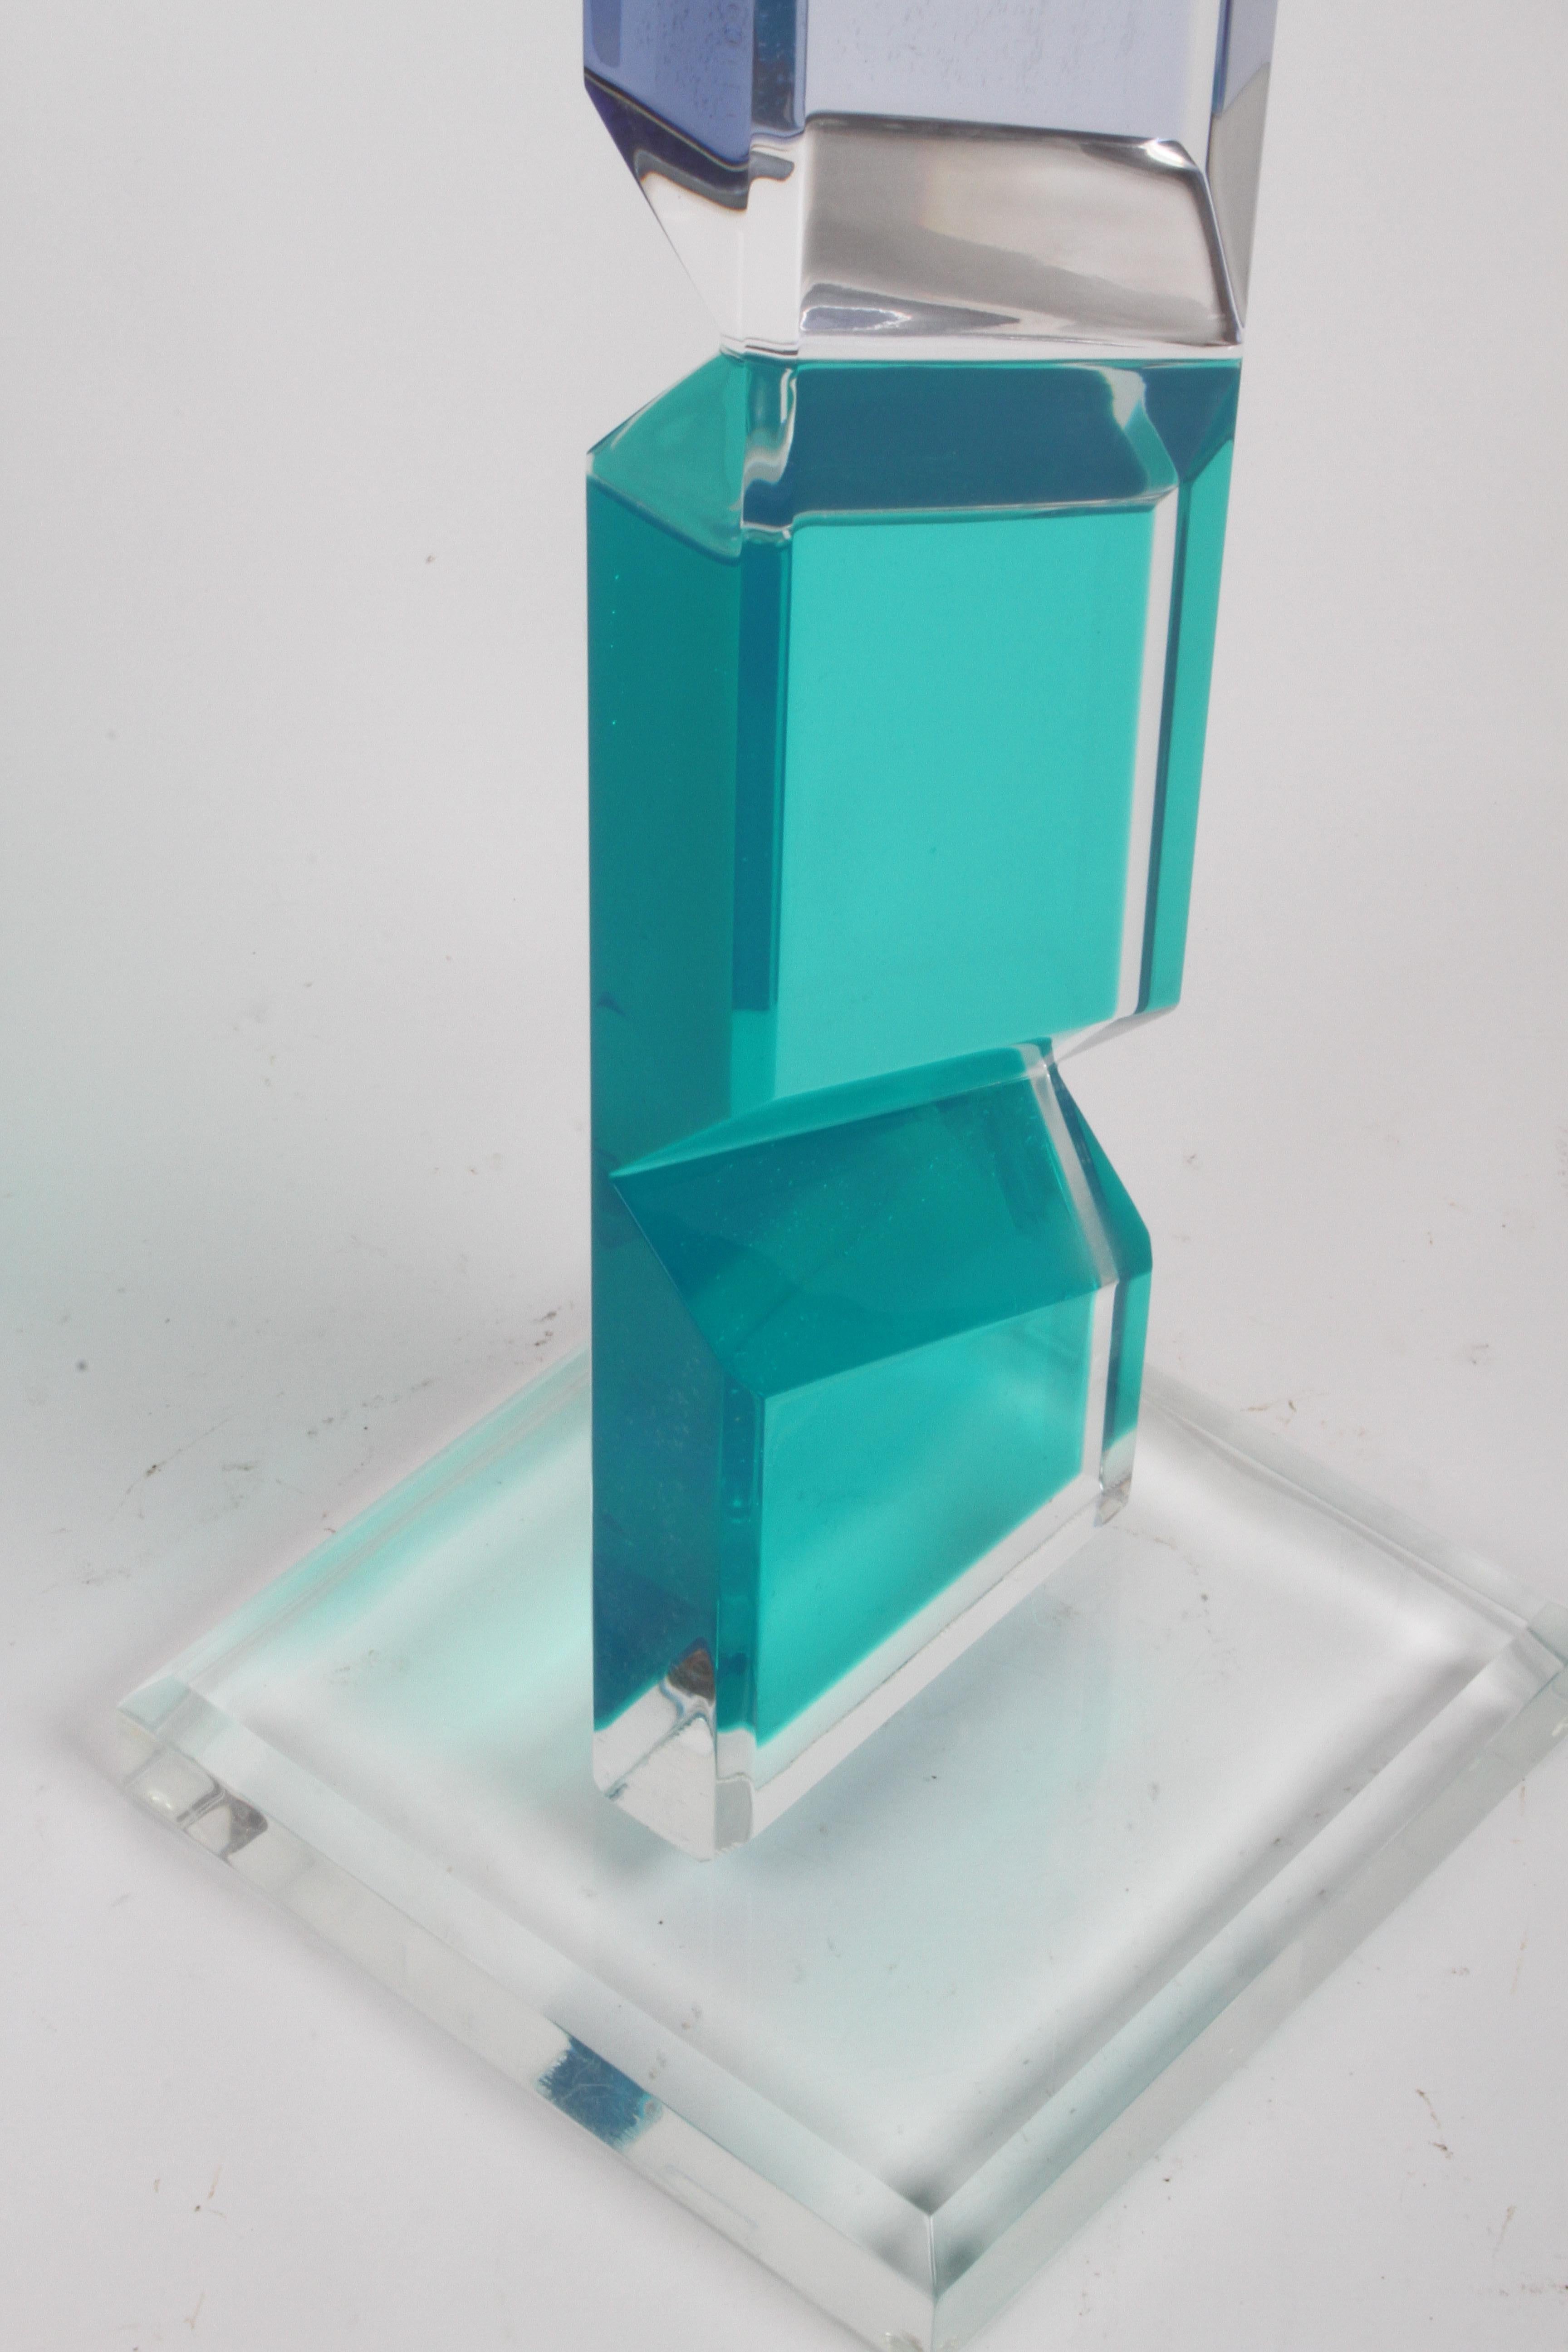 Unusually Tall Shlomi Haziza Signed Op-Art Colored Lucite TOTEM Form Sculpture 1